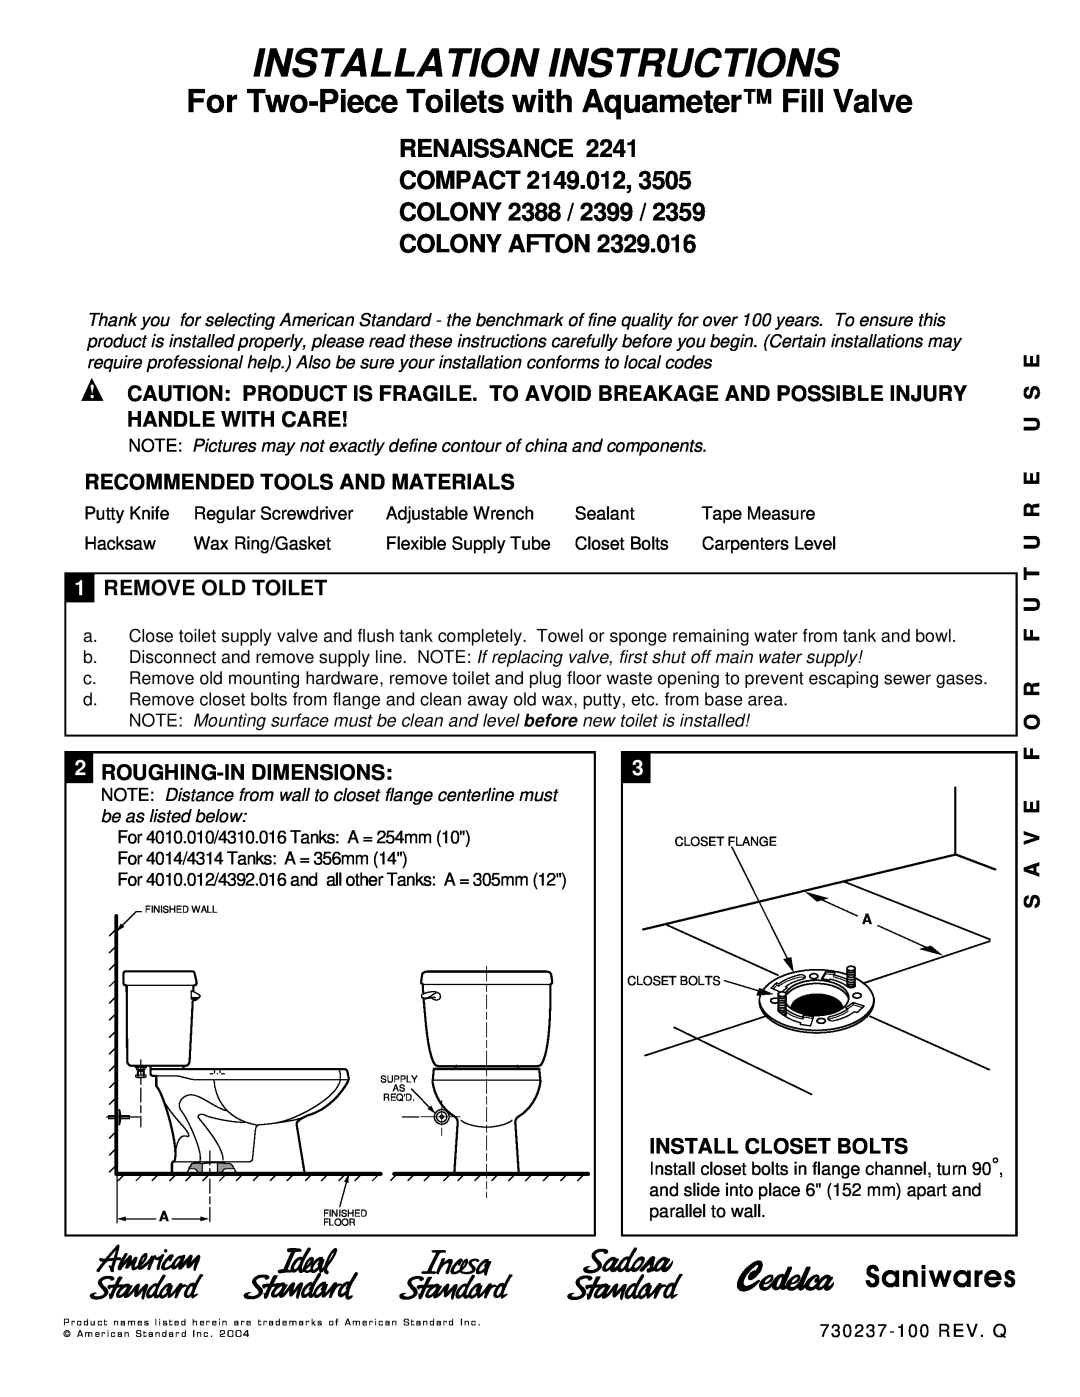 American Standard Colony 2388 installation instructions Handle With Care, U S E, Recommended Tools And Materials, S A V E 